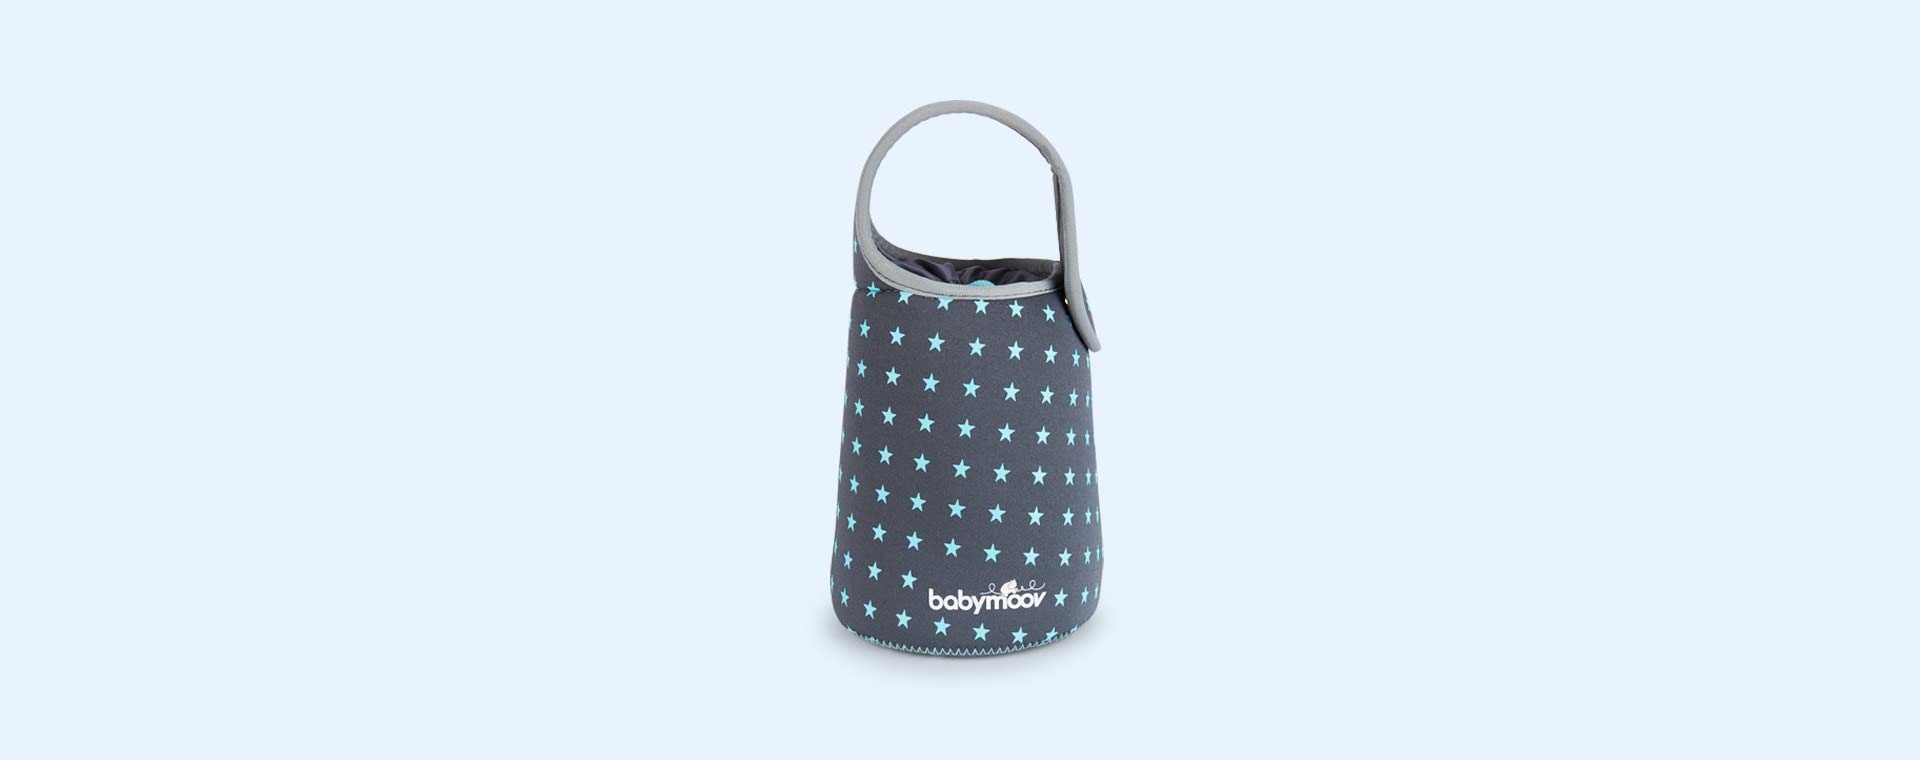 Buy the Babymoov Travel Bottle Warmer. Tried & Tested by